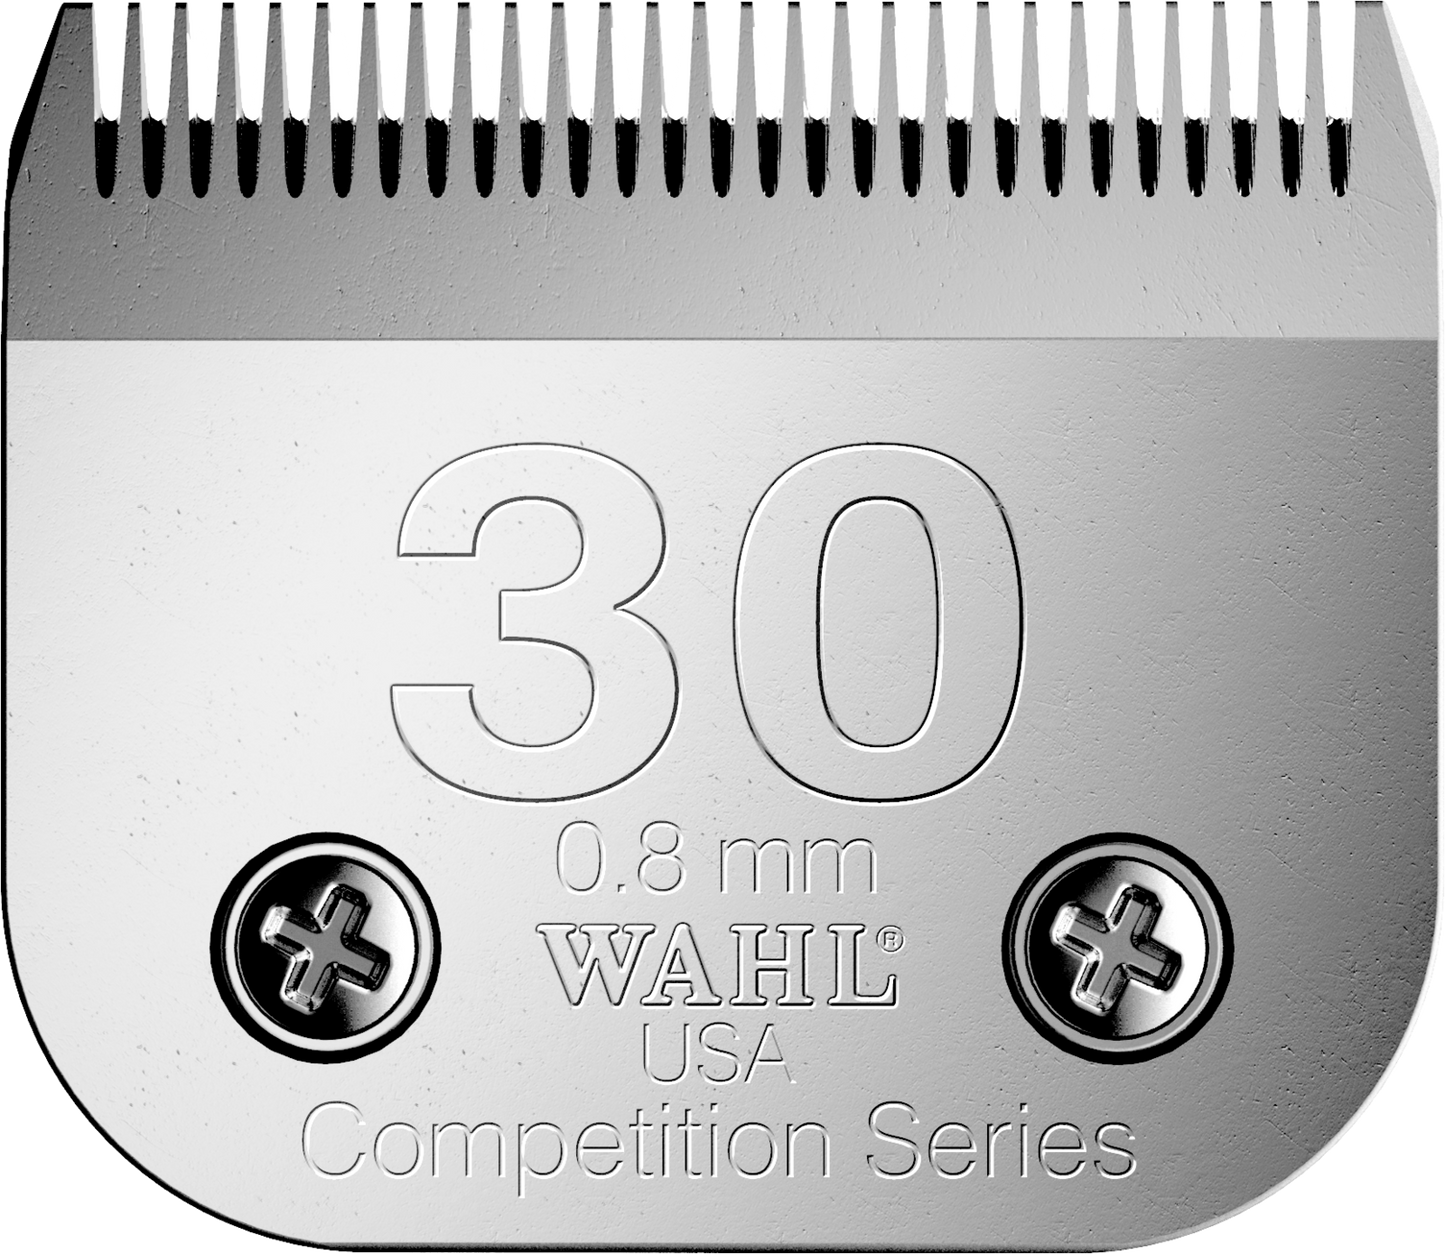 Wahl Competition Blade Size 30, 0.8mm